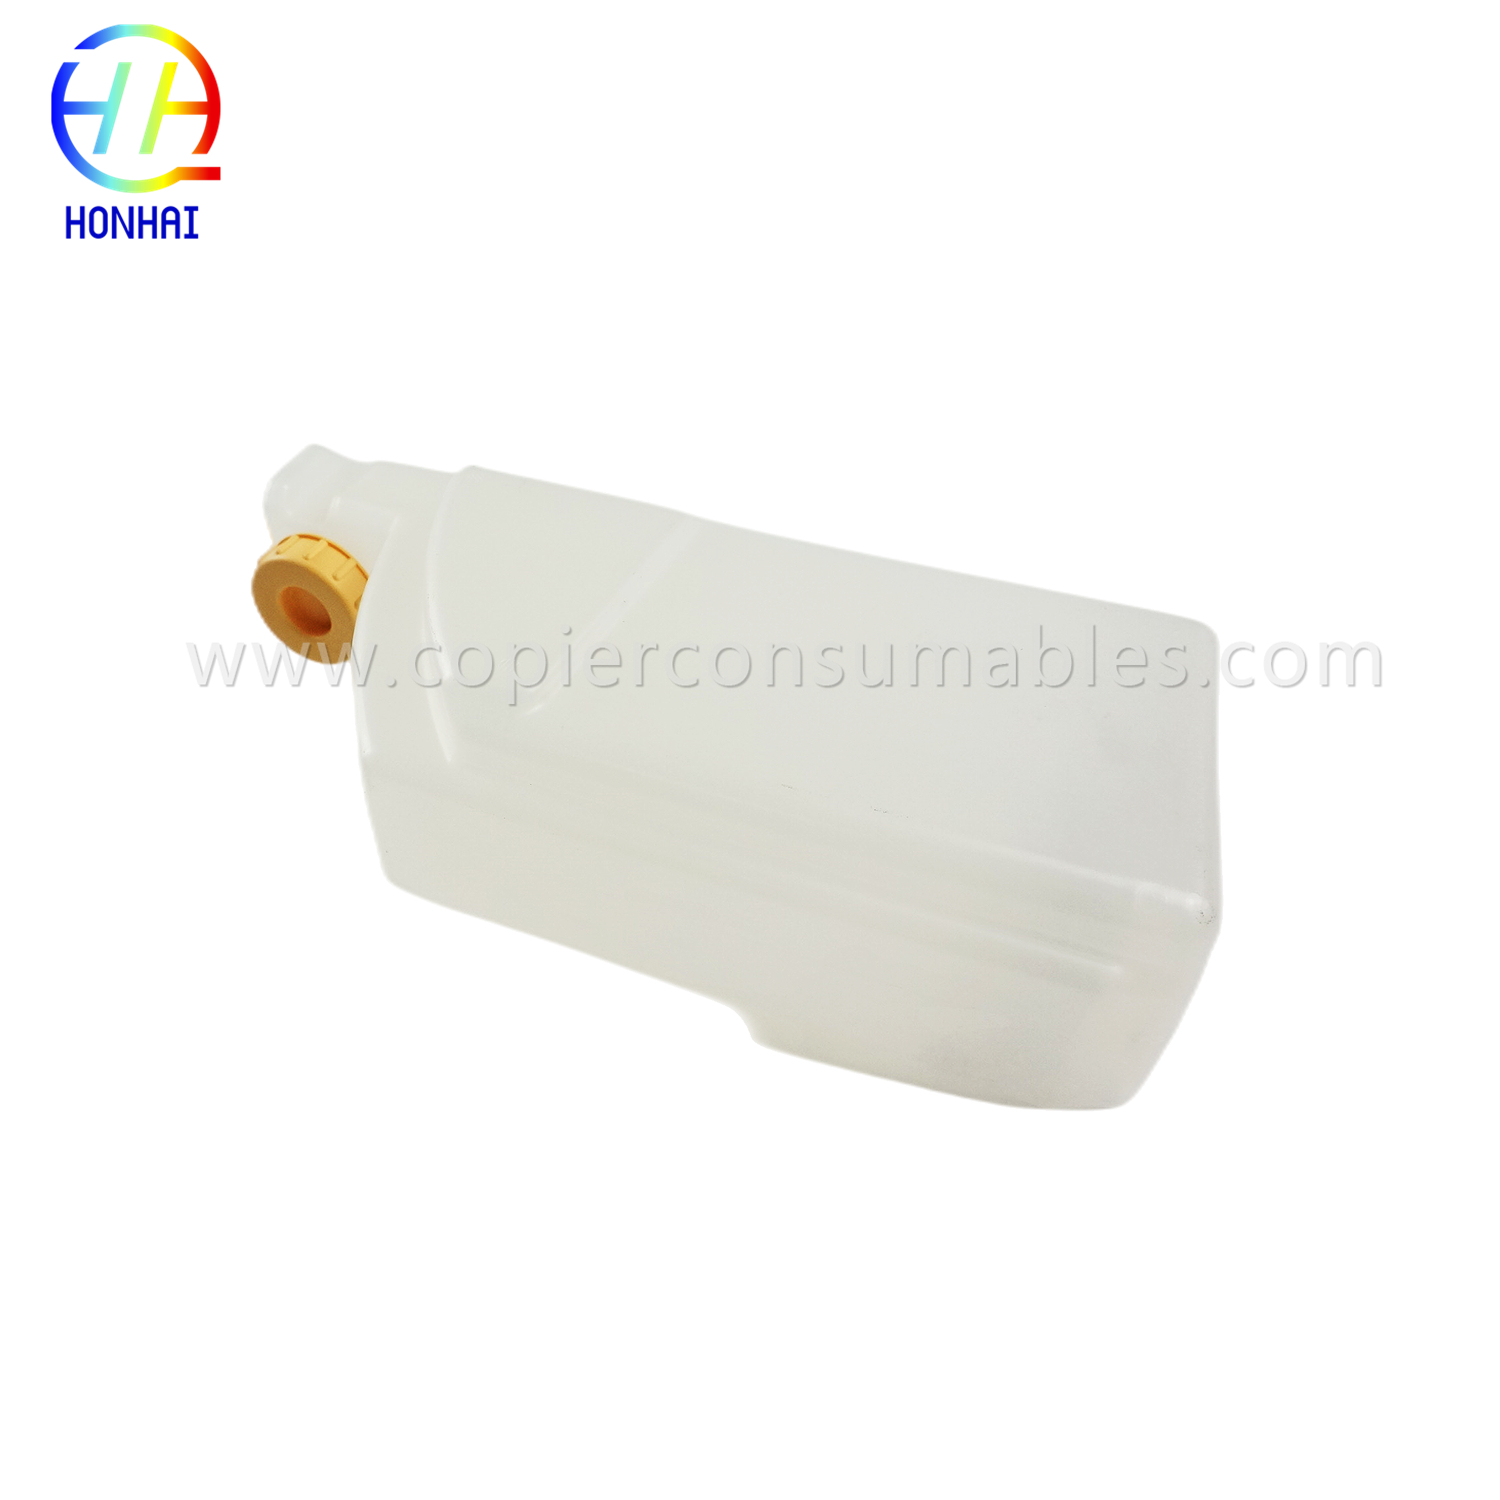 https://www.copierconsumables.com/waste-toner-bottle-for-xerox-8r12896-5890-5655-5740-5790-5855-5655-5740-product/